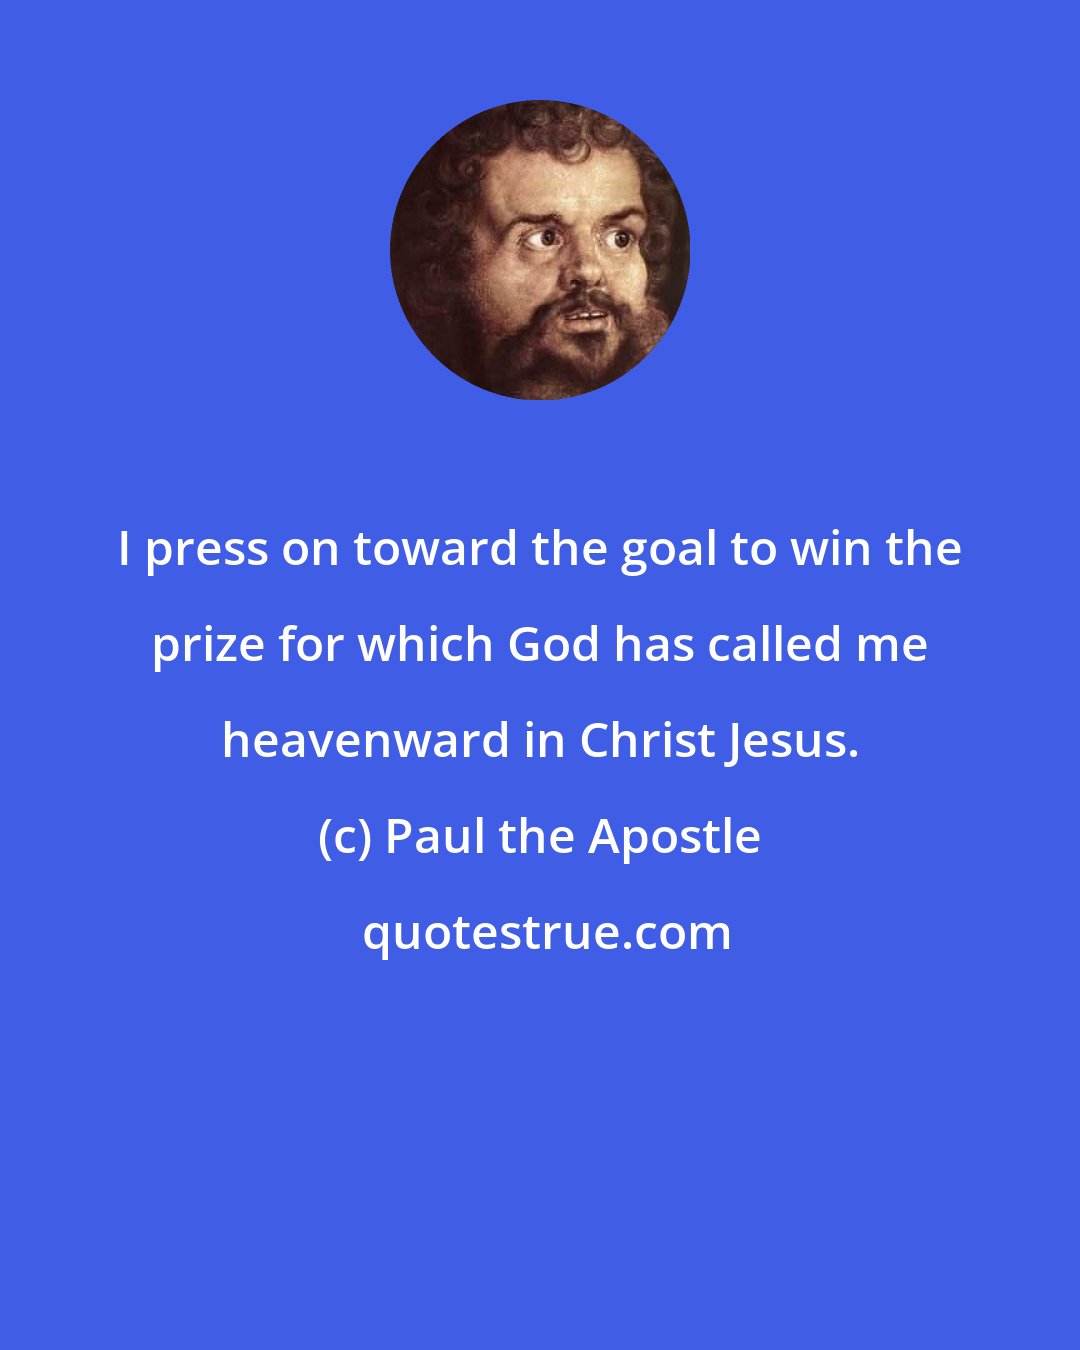 Paul the Apostle: I press on toward the goal to win the prize for which God has called me heavenward in Christ Jesus.